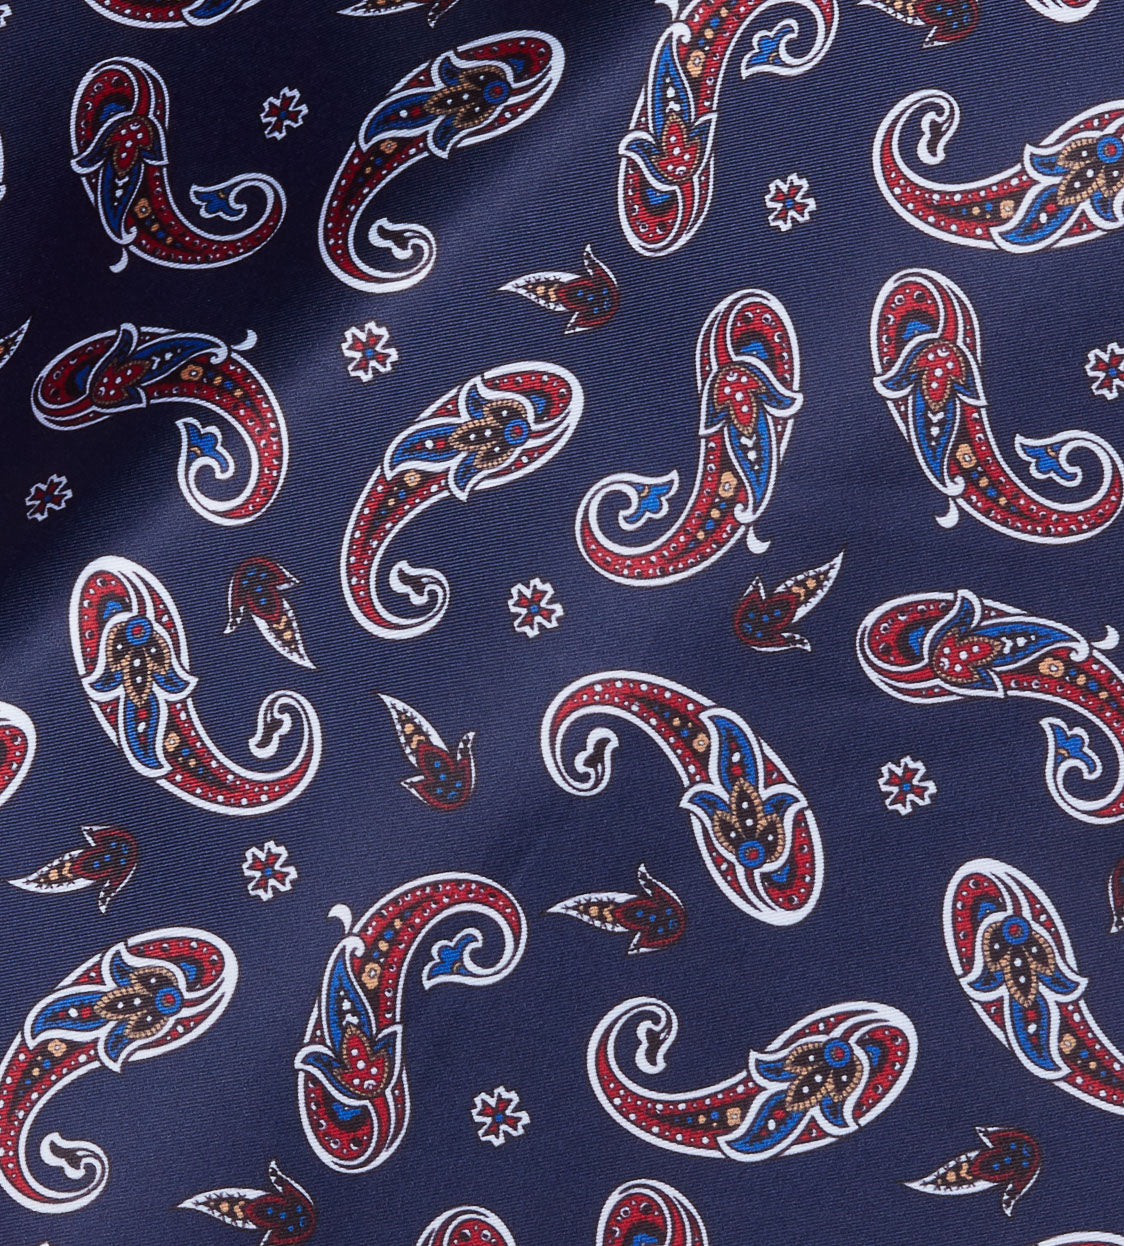 Red-Blue Paisley Pocket Square